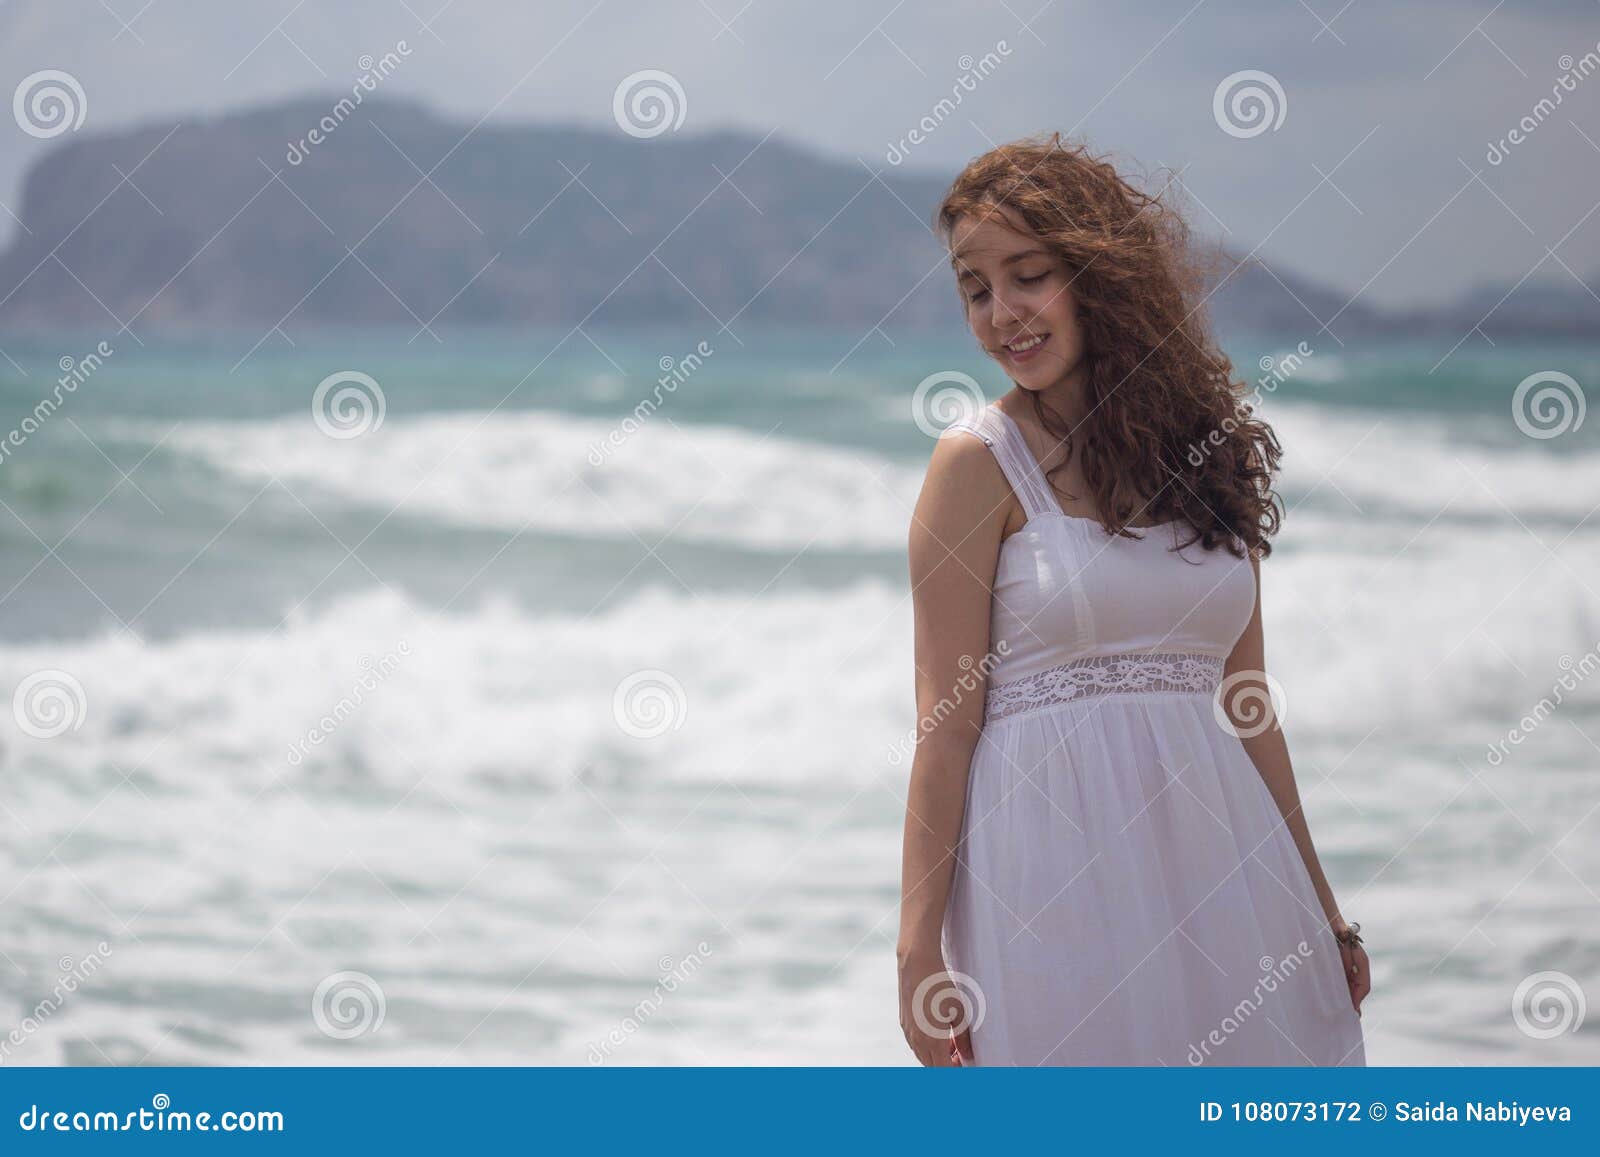 young brunette female with wavy hair wearing white dress